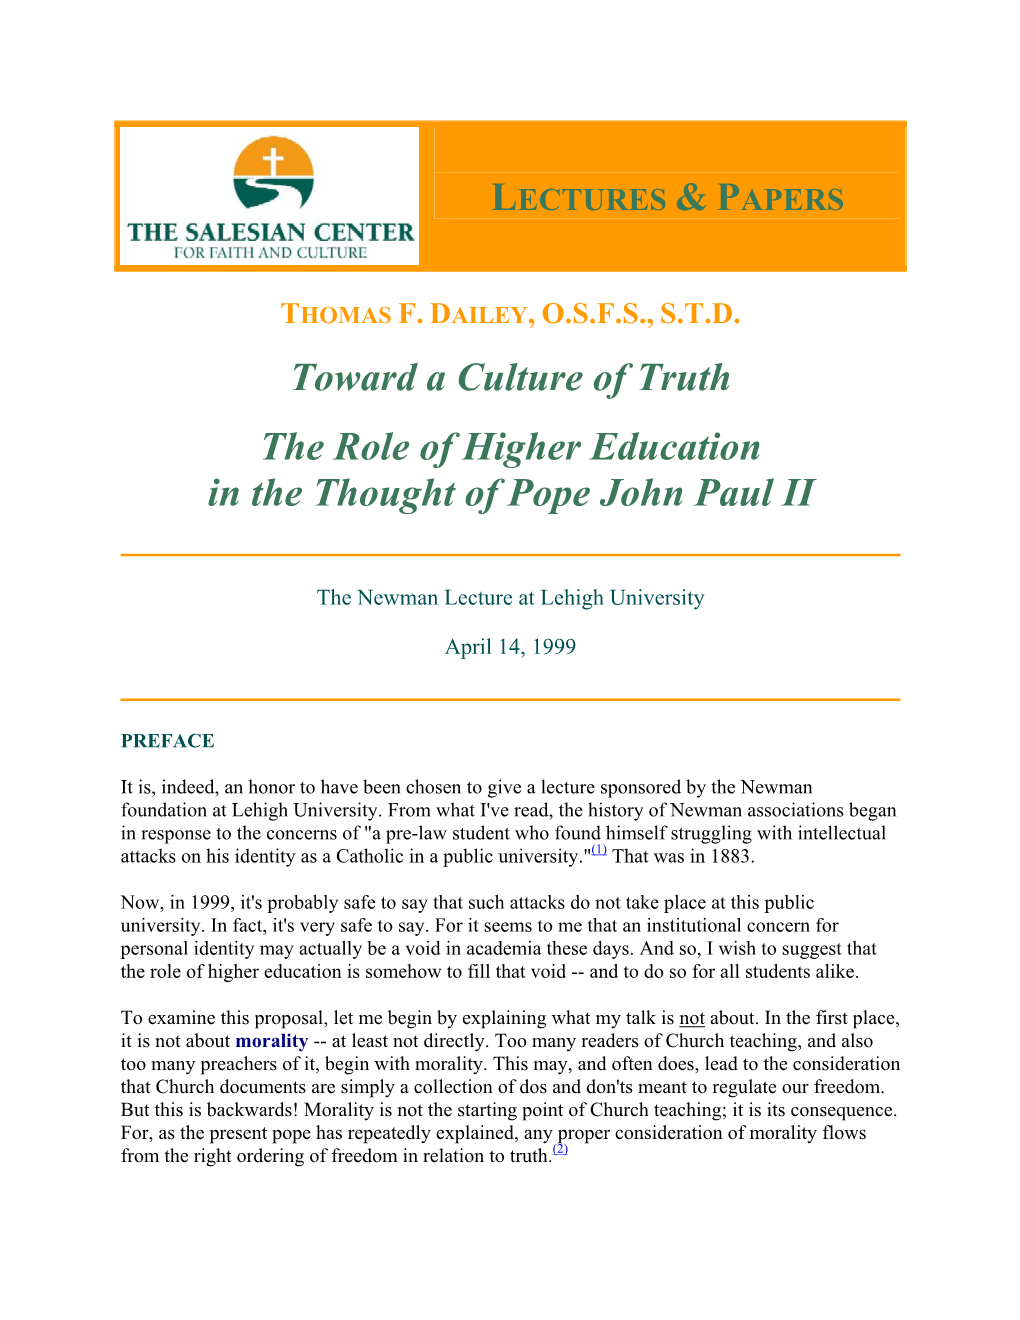 Toward a Culture of Truth the Role of Higher Education in the Thought of Pope John Paul II